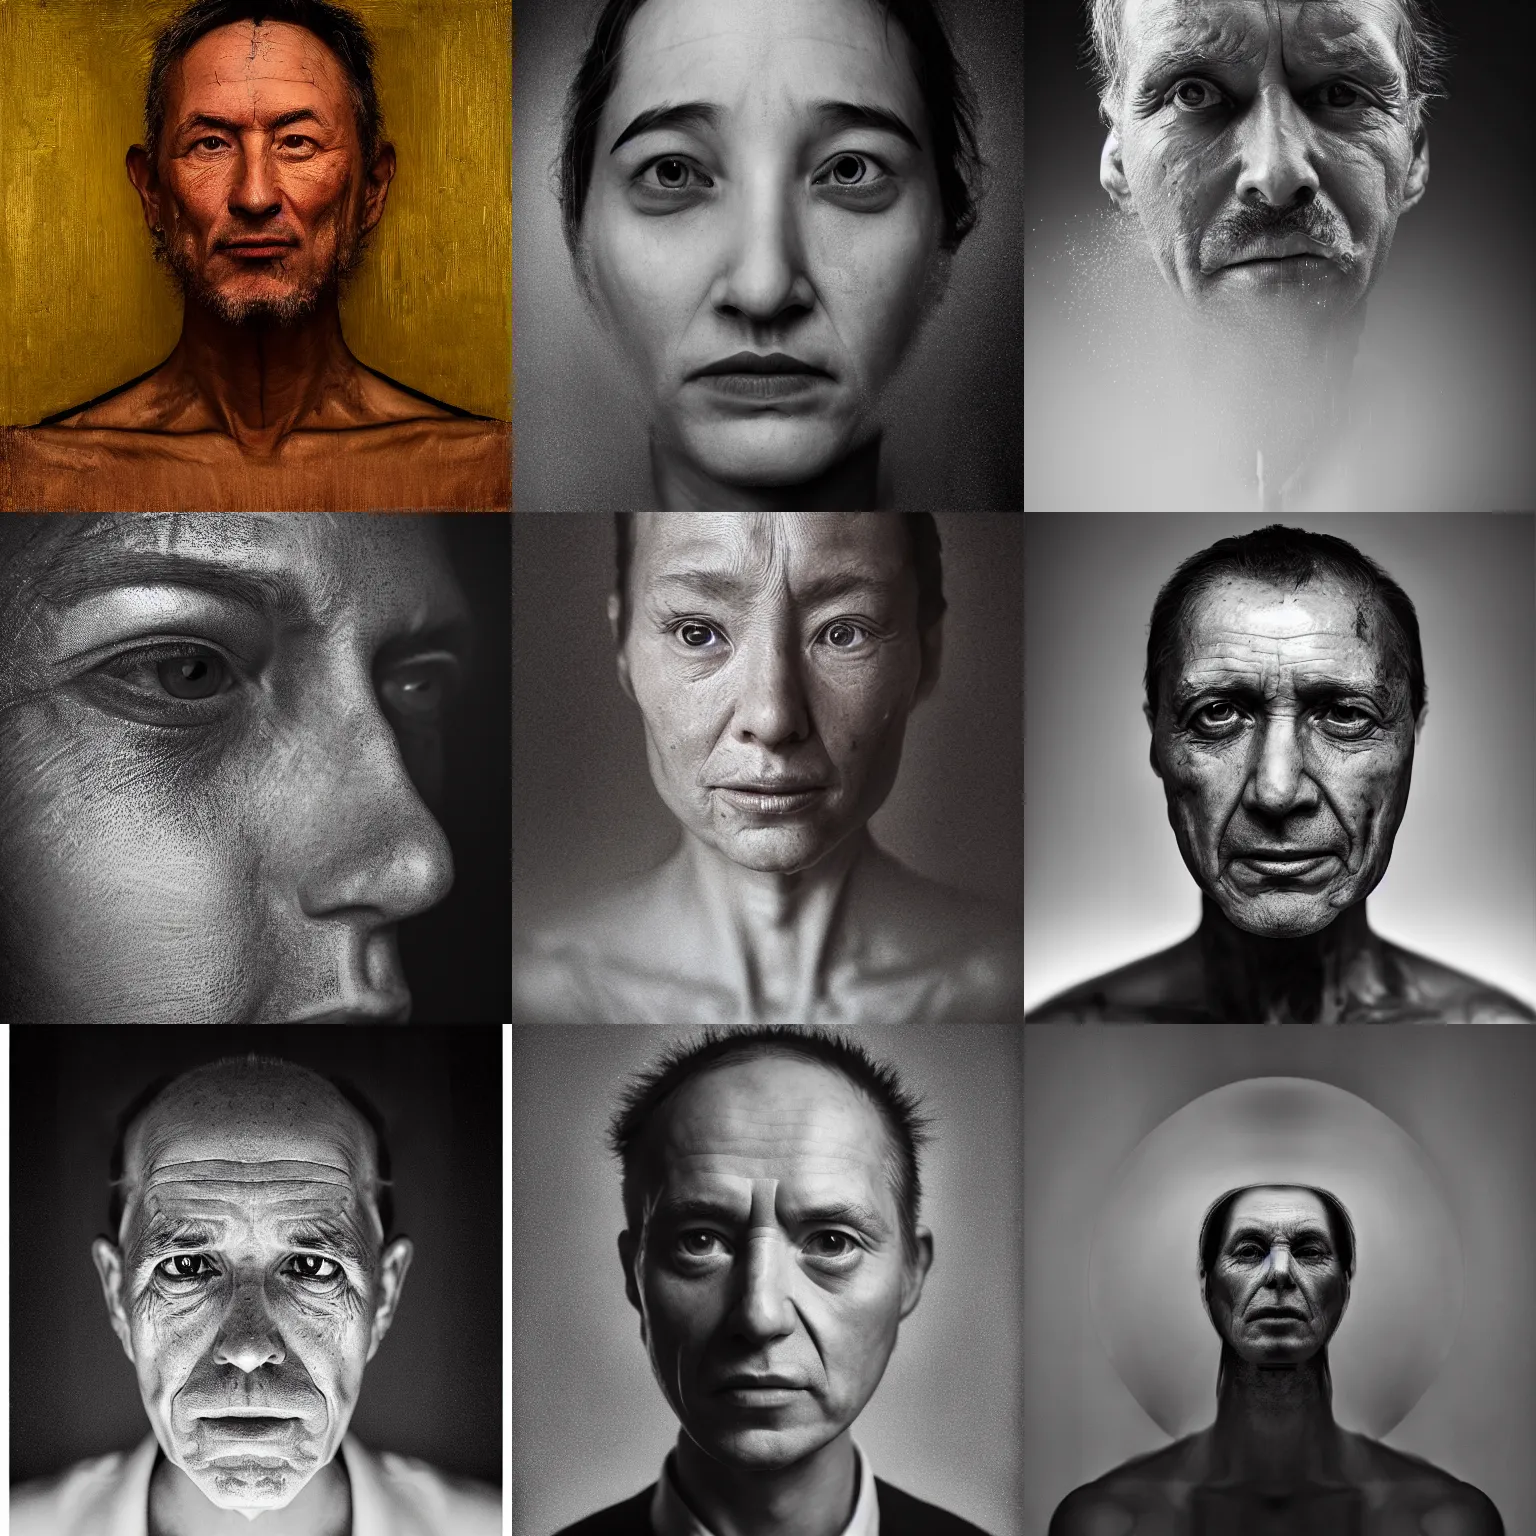 Prompt: 'Portrait of an AI' image of an artificial intelligence as a human face by Refik Anadol, photography Lee Jeffries, perfect lighting, studio lit, micro details, decor by Gustav Klimt, EOS-1D, f/1.4, ISO 200, 1/160s, 8K, RAW, unedited, symmetrical balance, in-frame